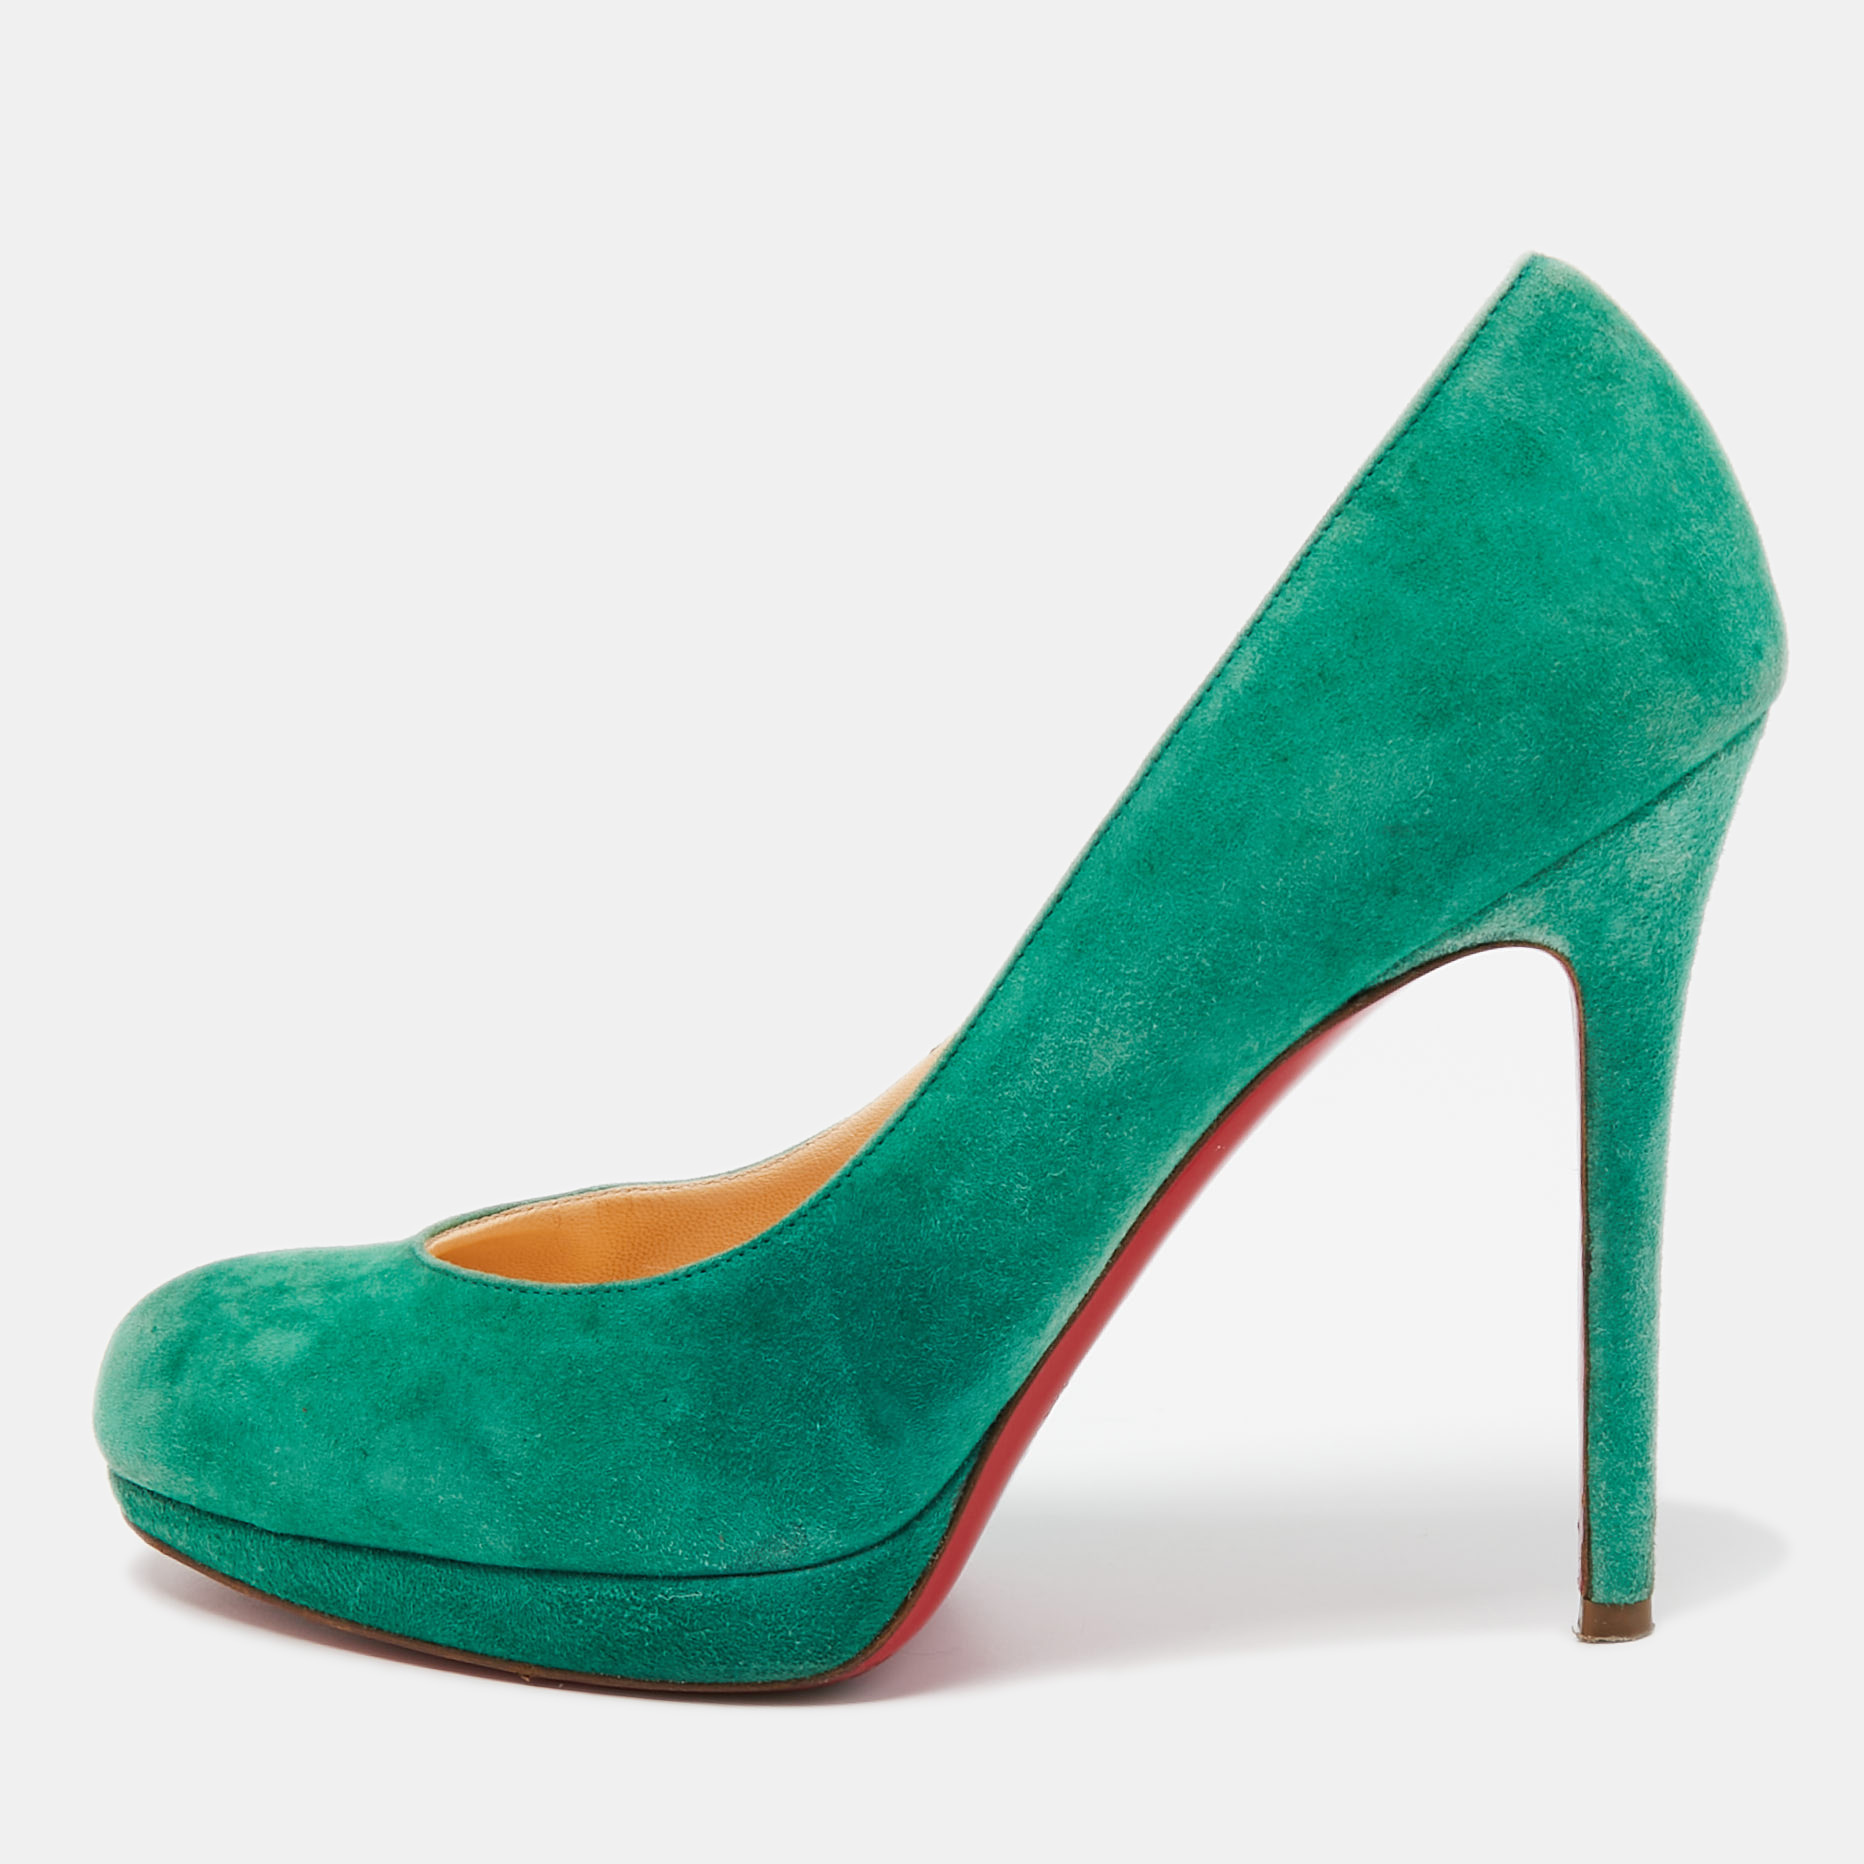 Christian louboutin green suede round toe pumps size 37.5